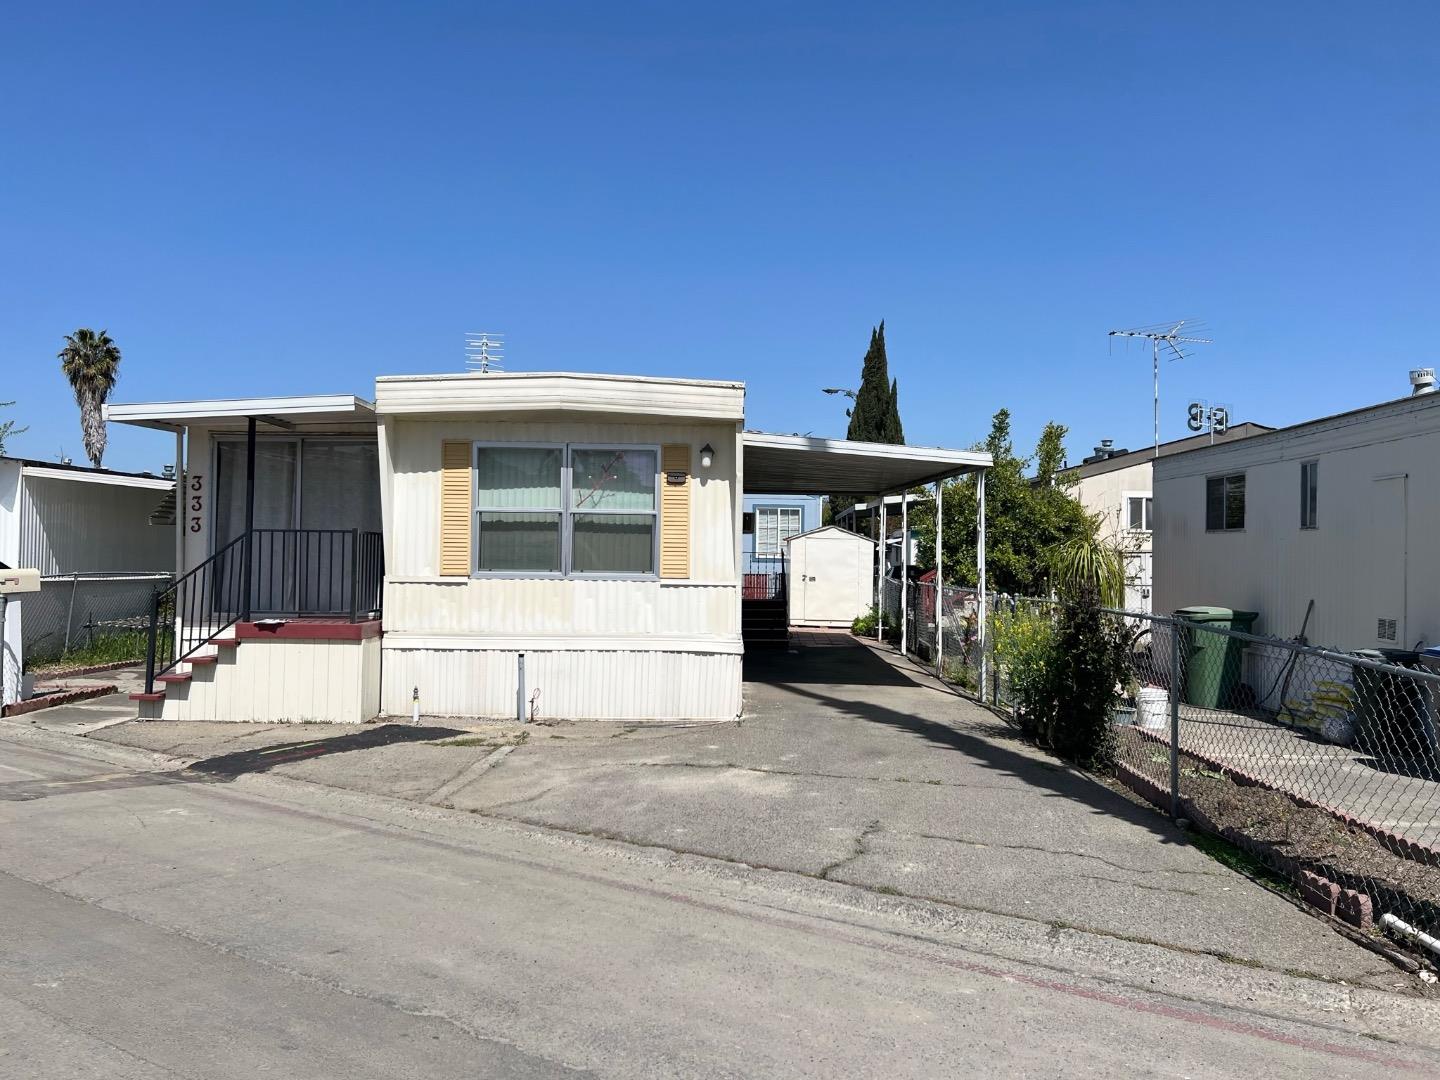 Photo of 411 Lewis Rd #333 in San Jose, CA